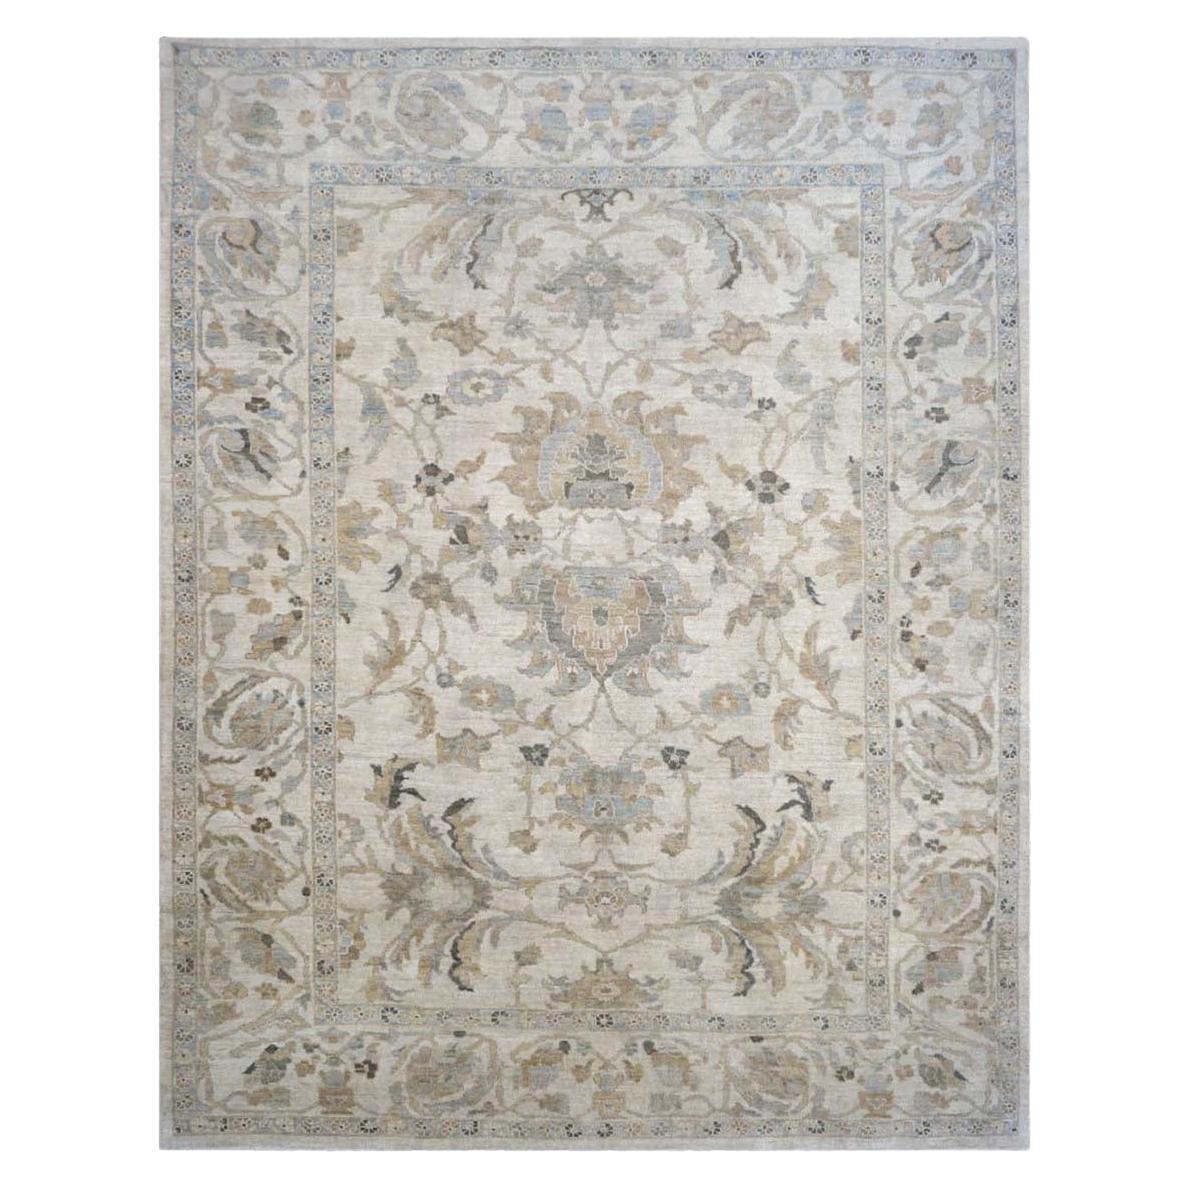 21st Century Persian Sultanabad 9x11 Ivory, Light Blue, & Tan Handmade Area Rug For Sale